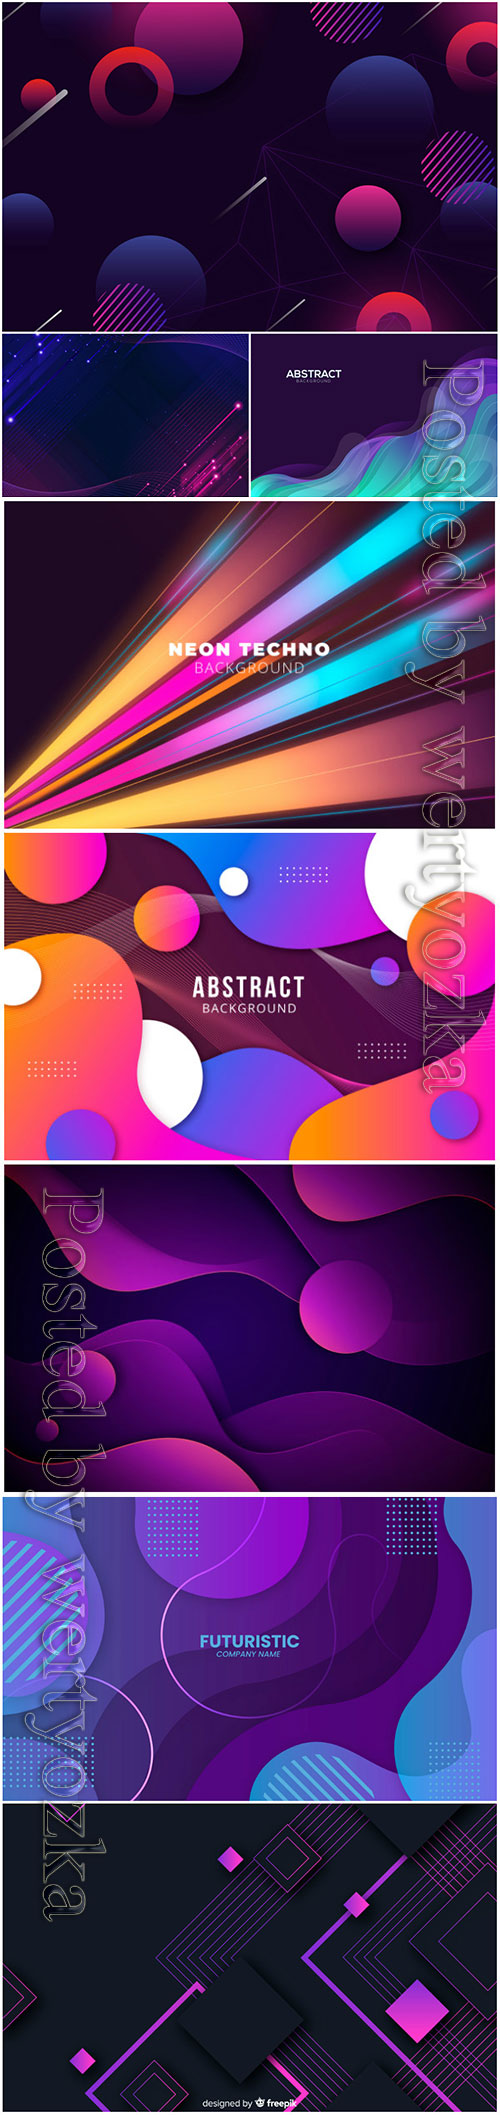 Luxury abstract backgrounds in vector # 2